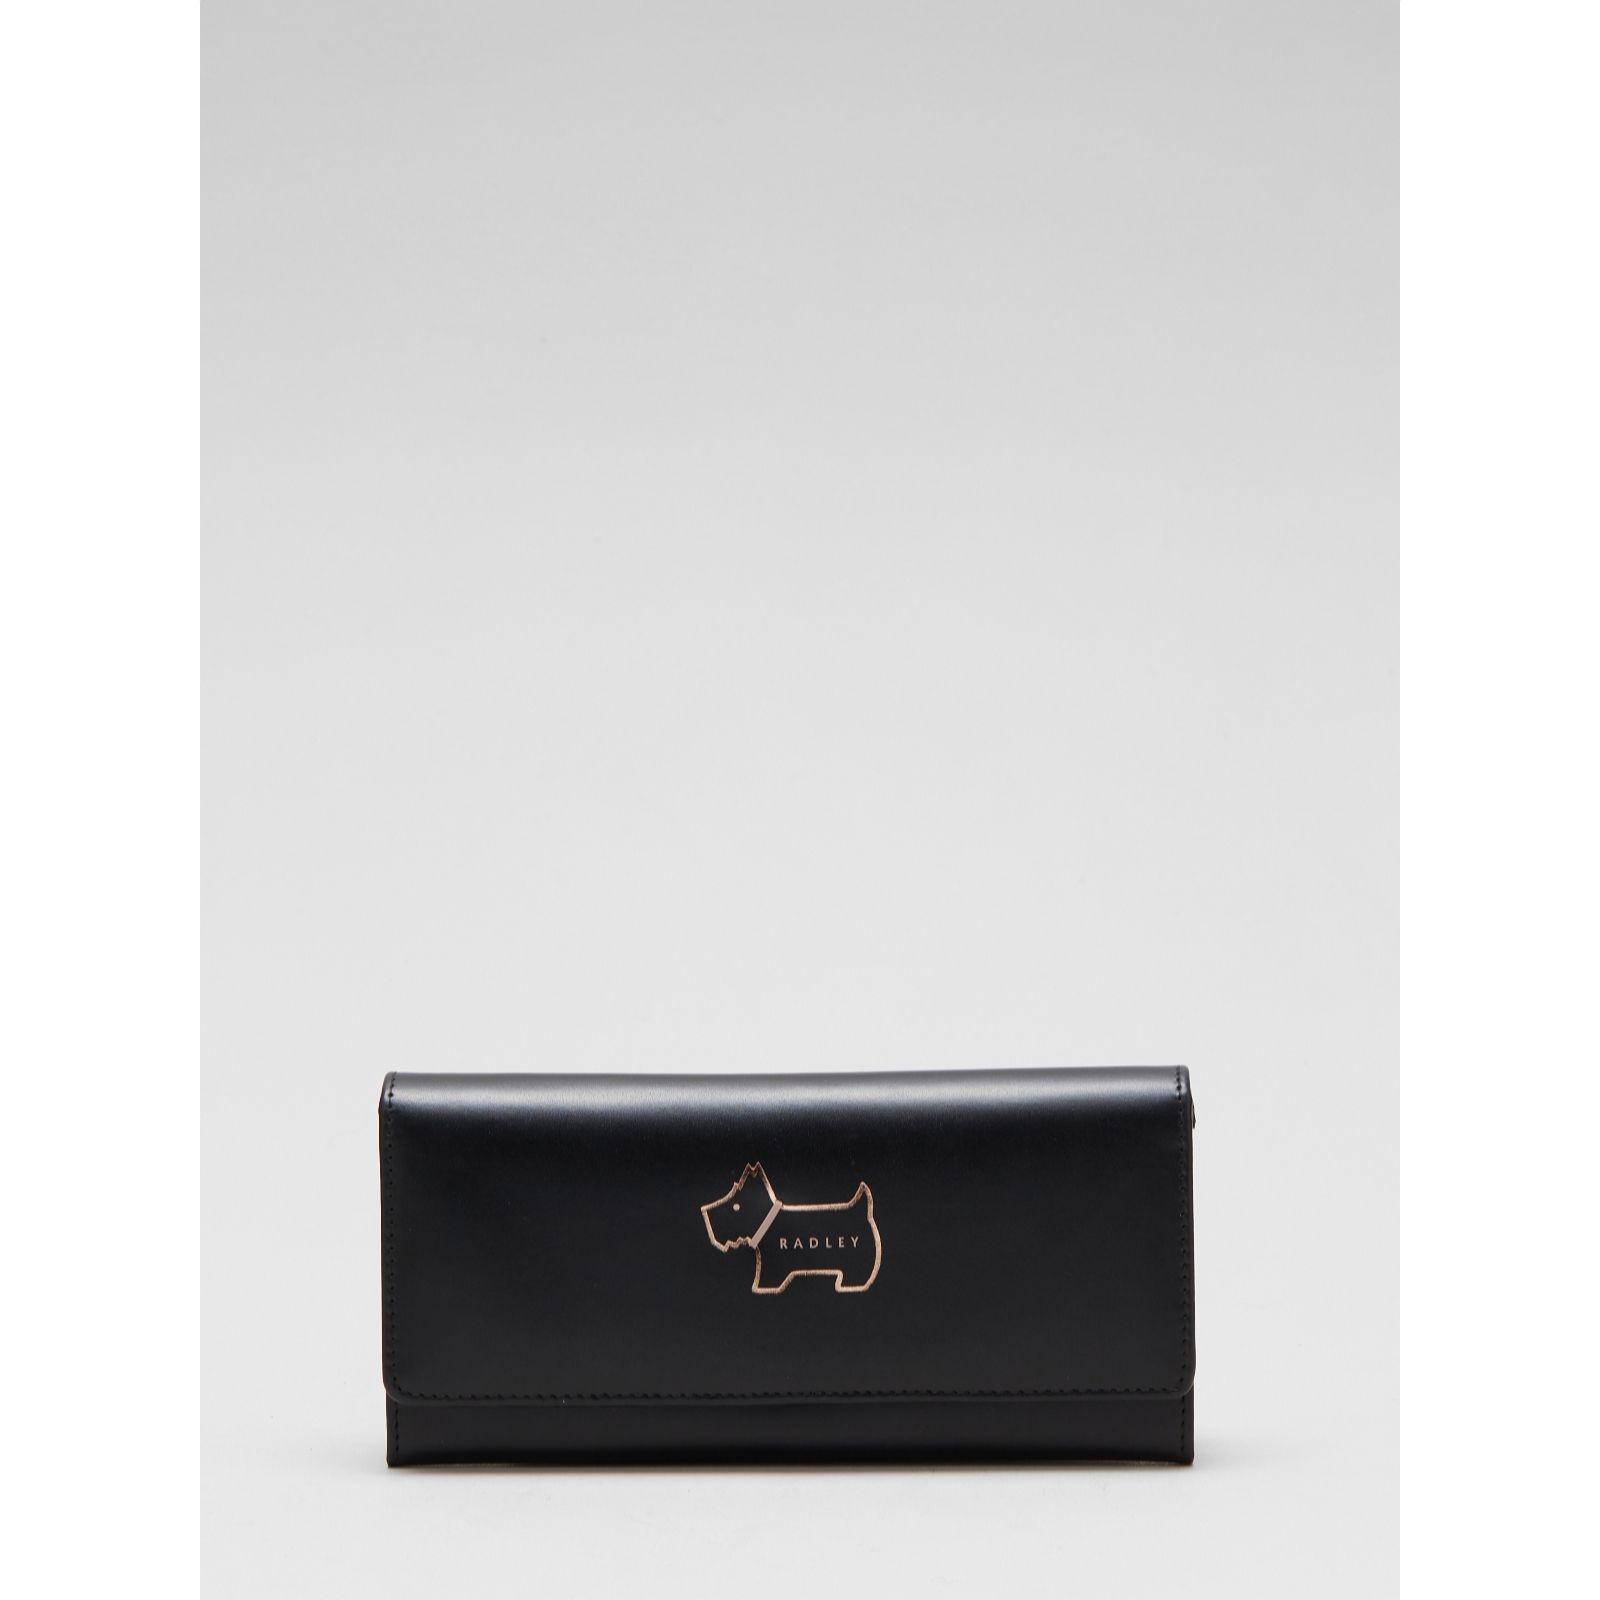 RADLEY London Ring Ring - Large Flapover Wallet 